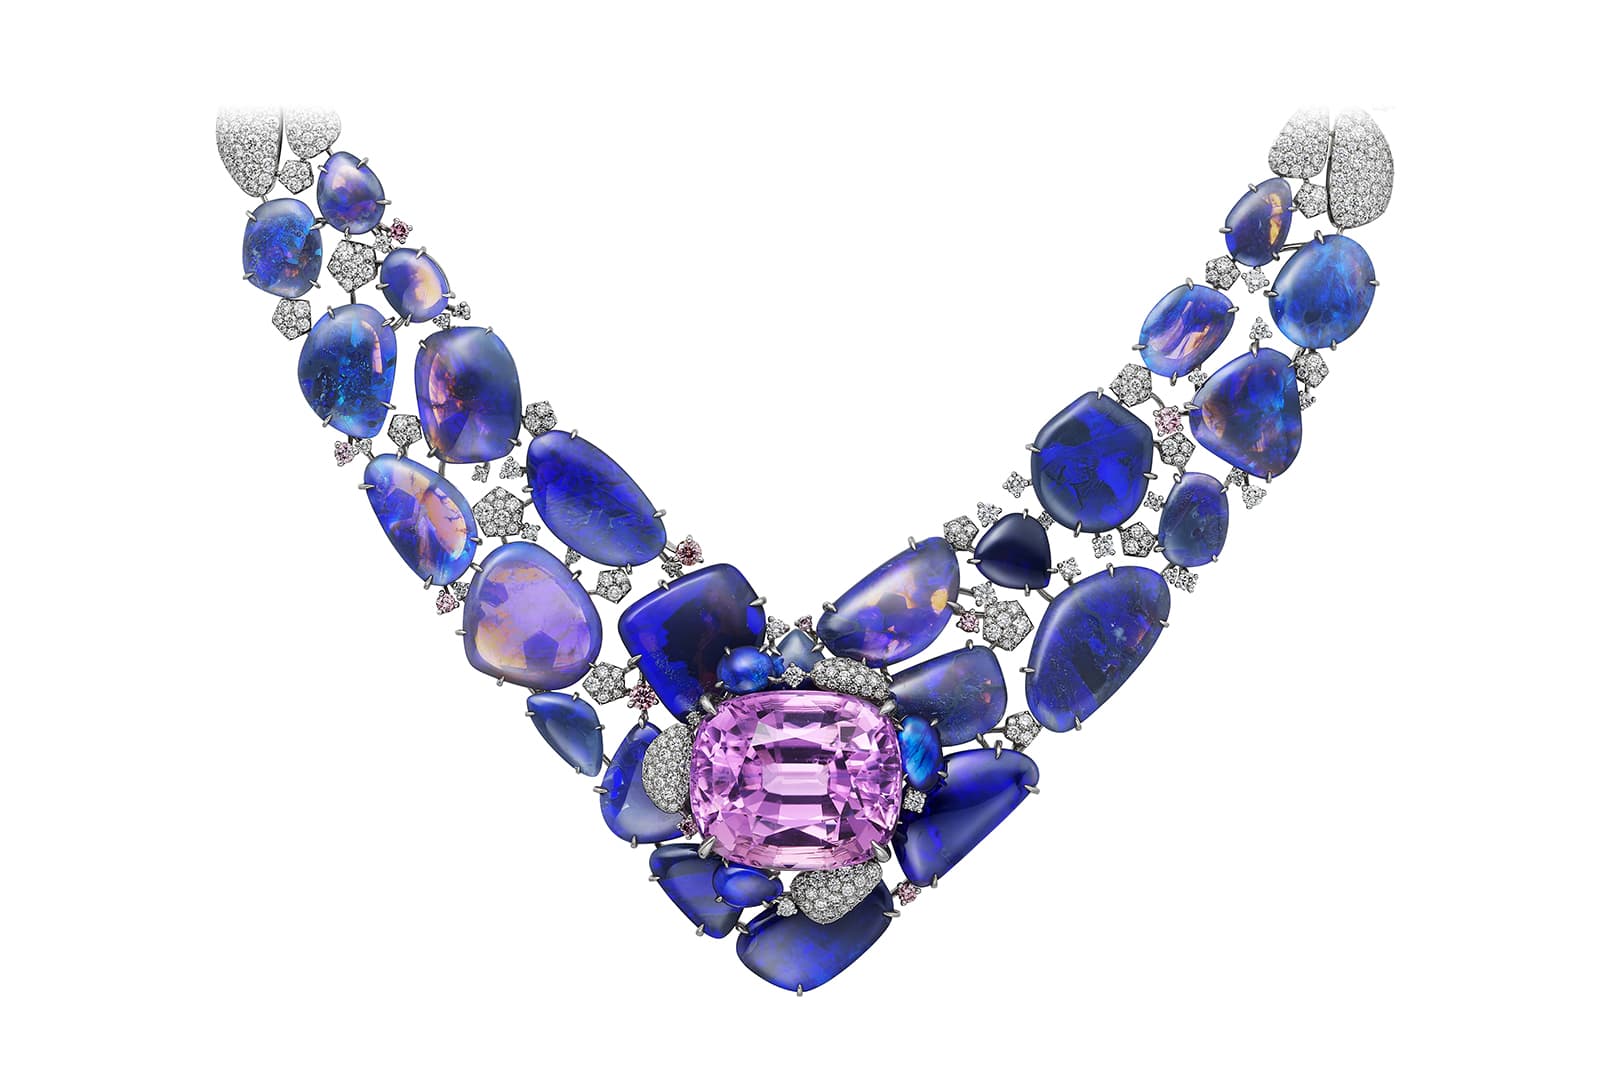 Cartier Captivates With Its [Sur]naturel High Jewellery Collection